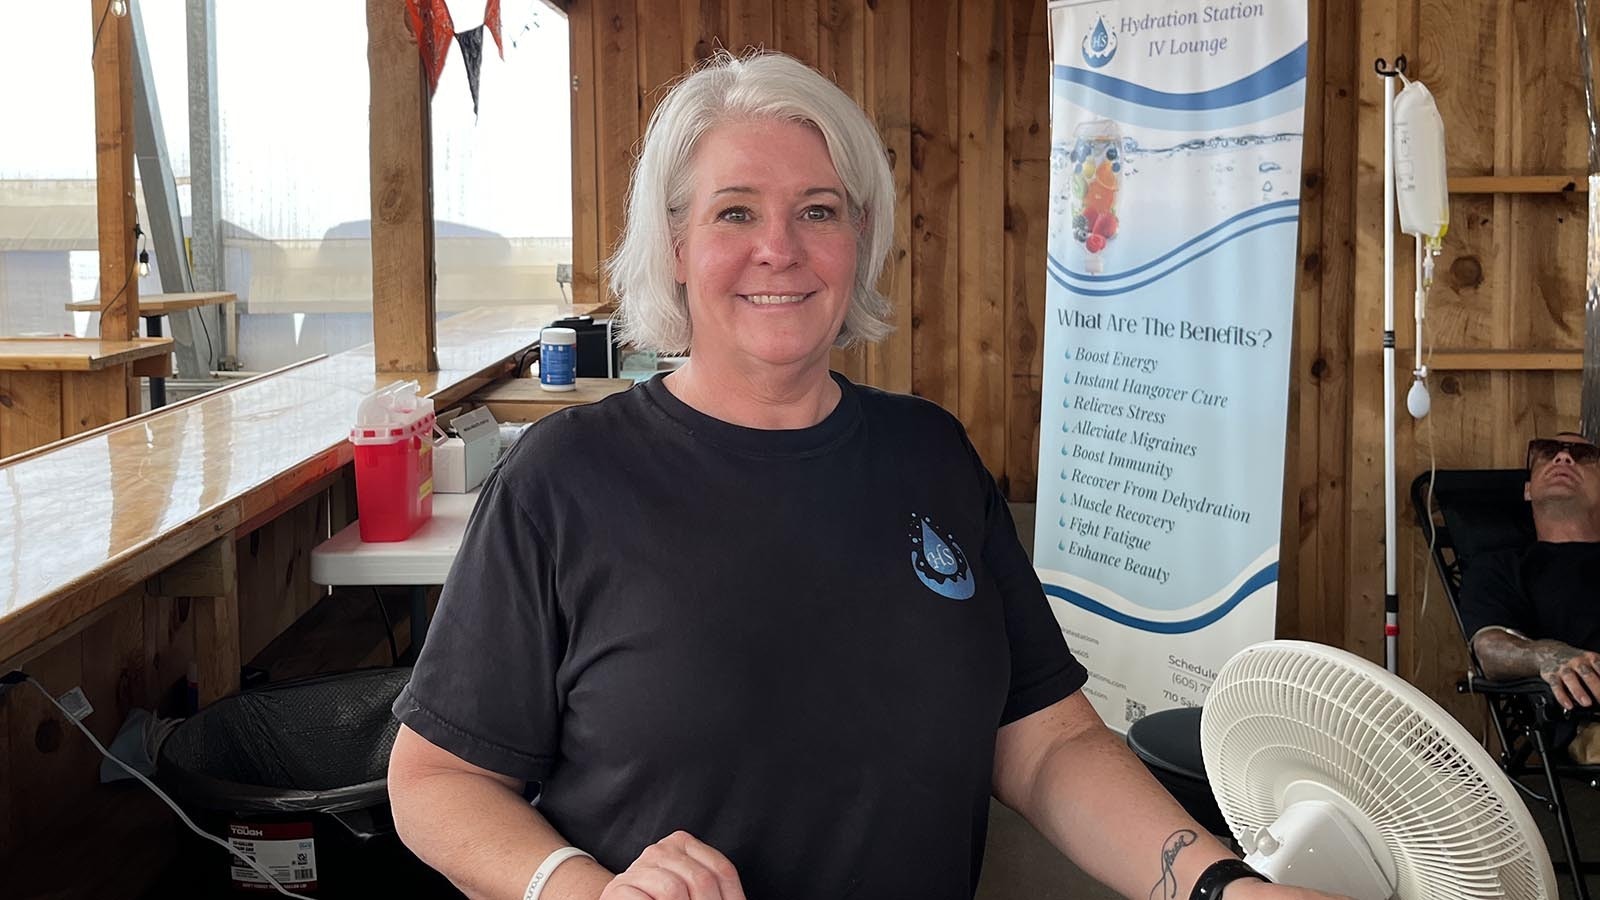 Stacy Kenitzer, 56, stands outside her booth for Hydration Station IV Lounge at the Sturgis Thunderdome.